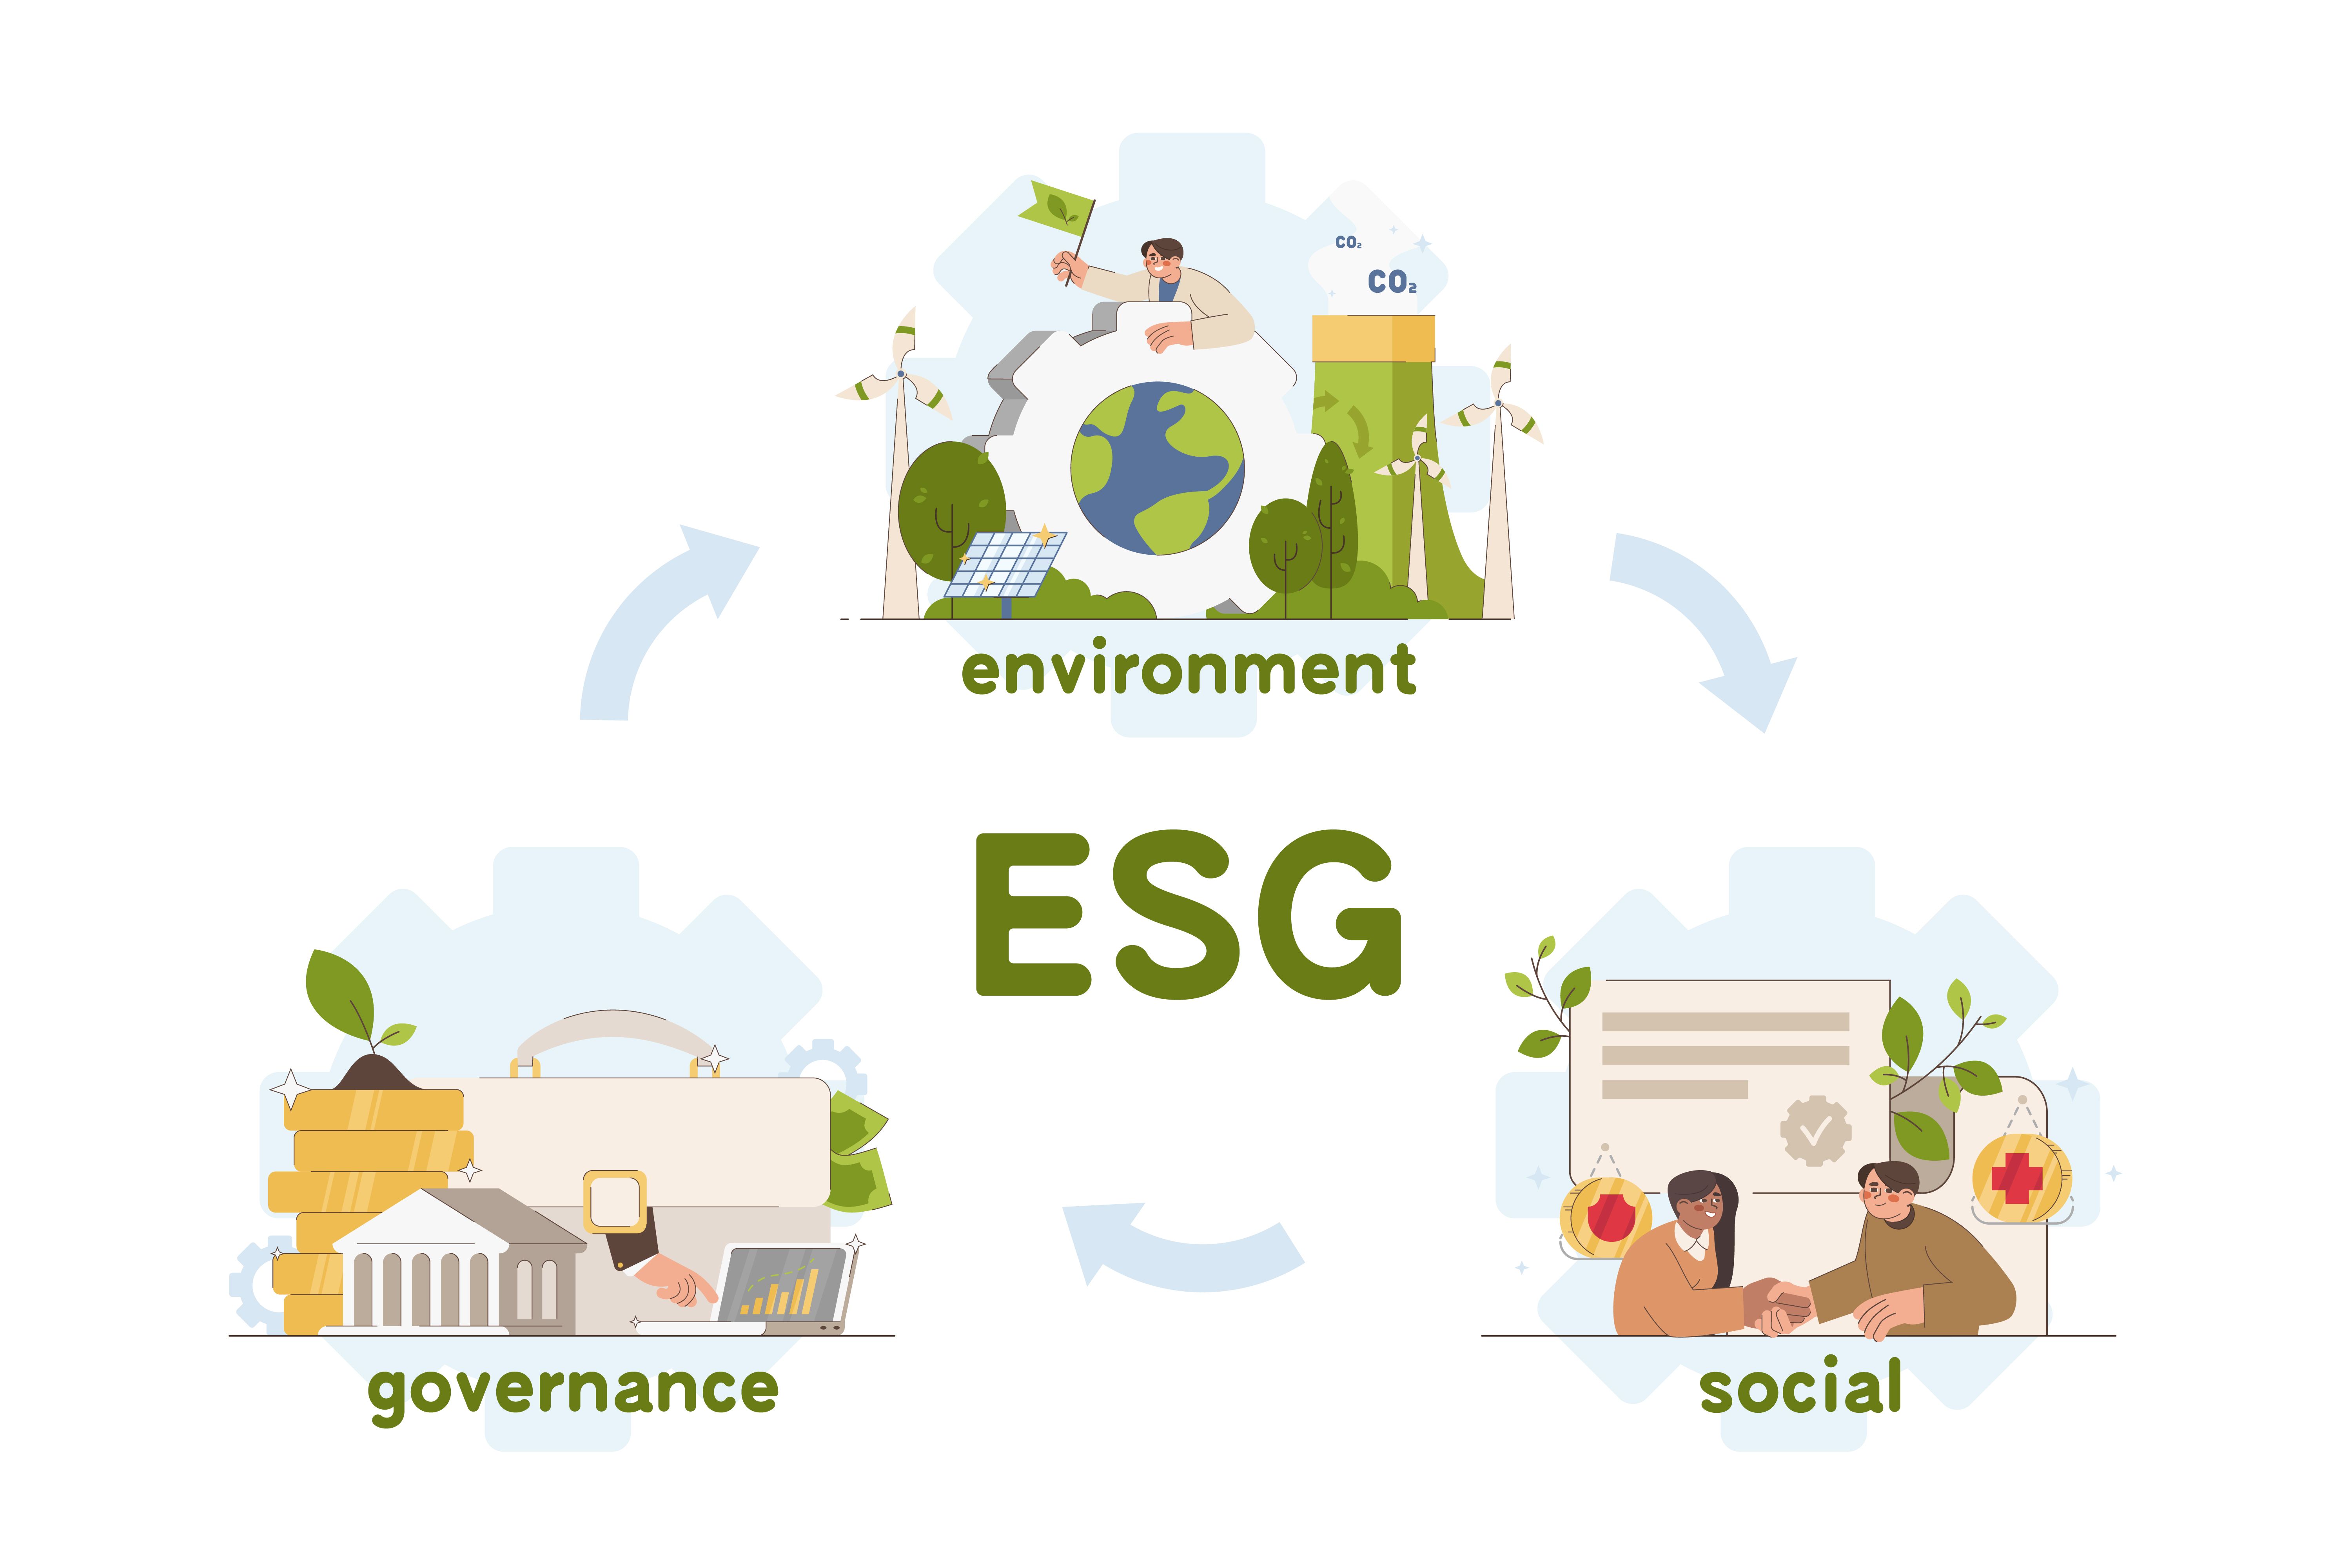 <a href="https://www.freepik.com/free-vector/environment-social-governance-flat-concept_27059375.htm#query=esg&position=0&from_view=keyword&track=sph">Image by redgreystock</a> on Freepik